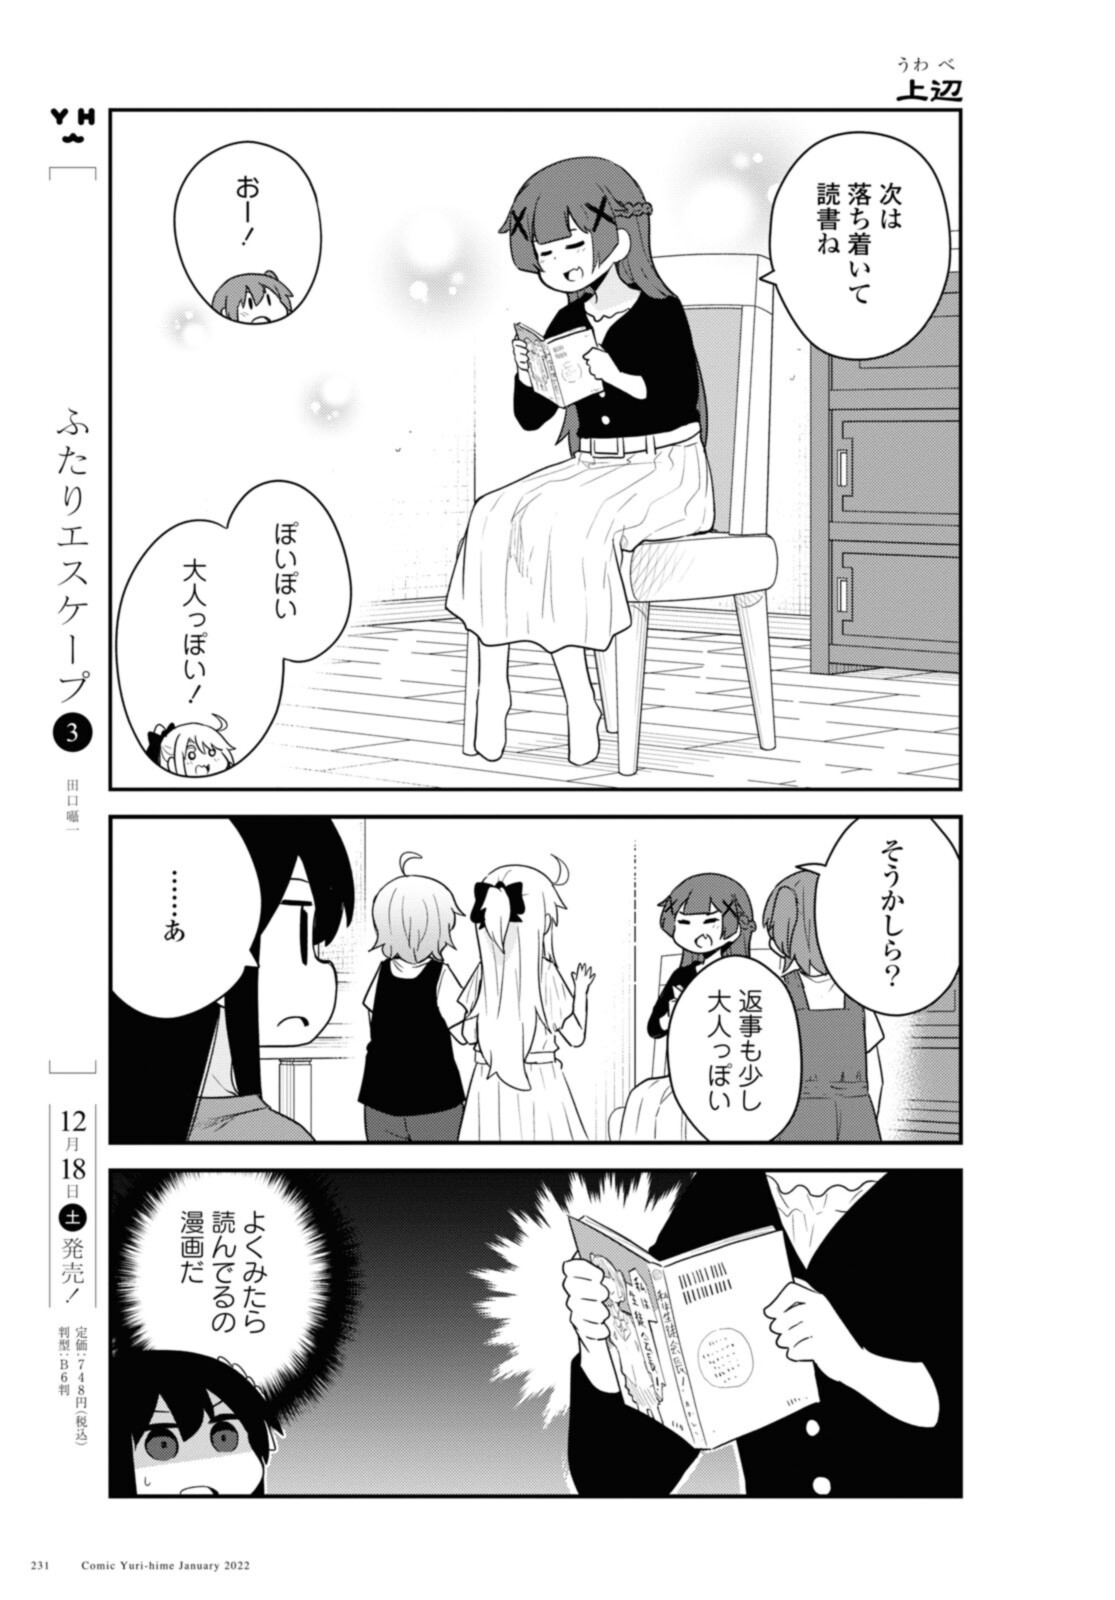 Wataten! An Angel Flew Down to Me 私に天使が舞い降りた！ 第91話 - Page 11